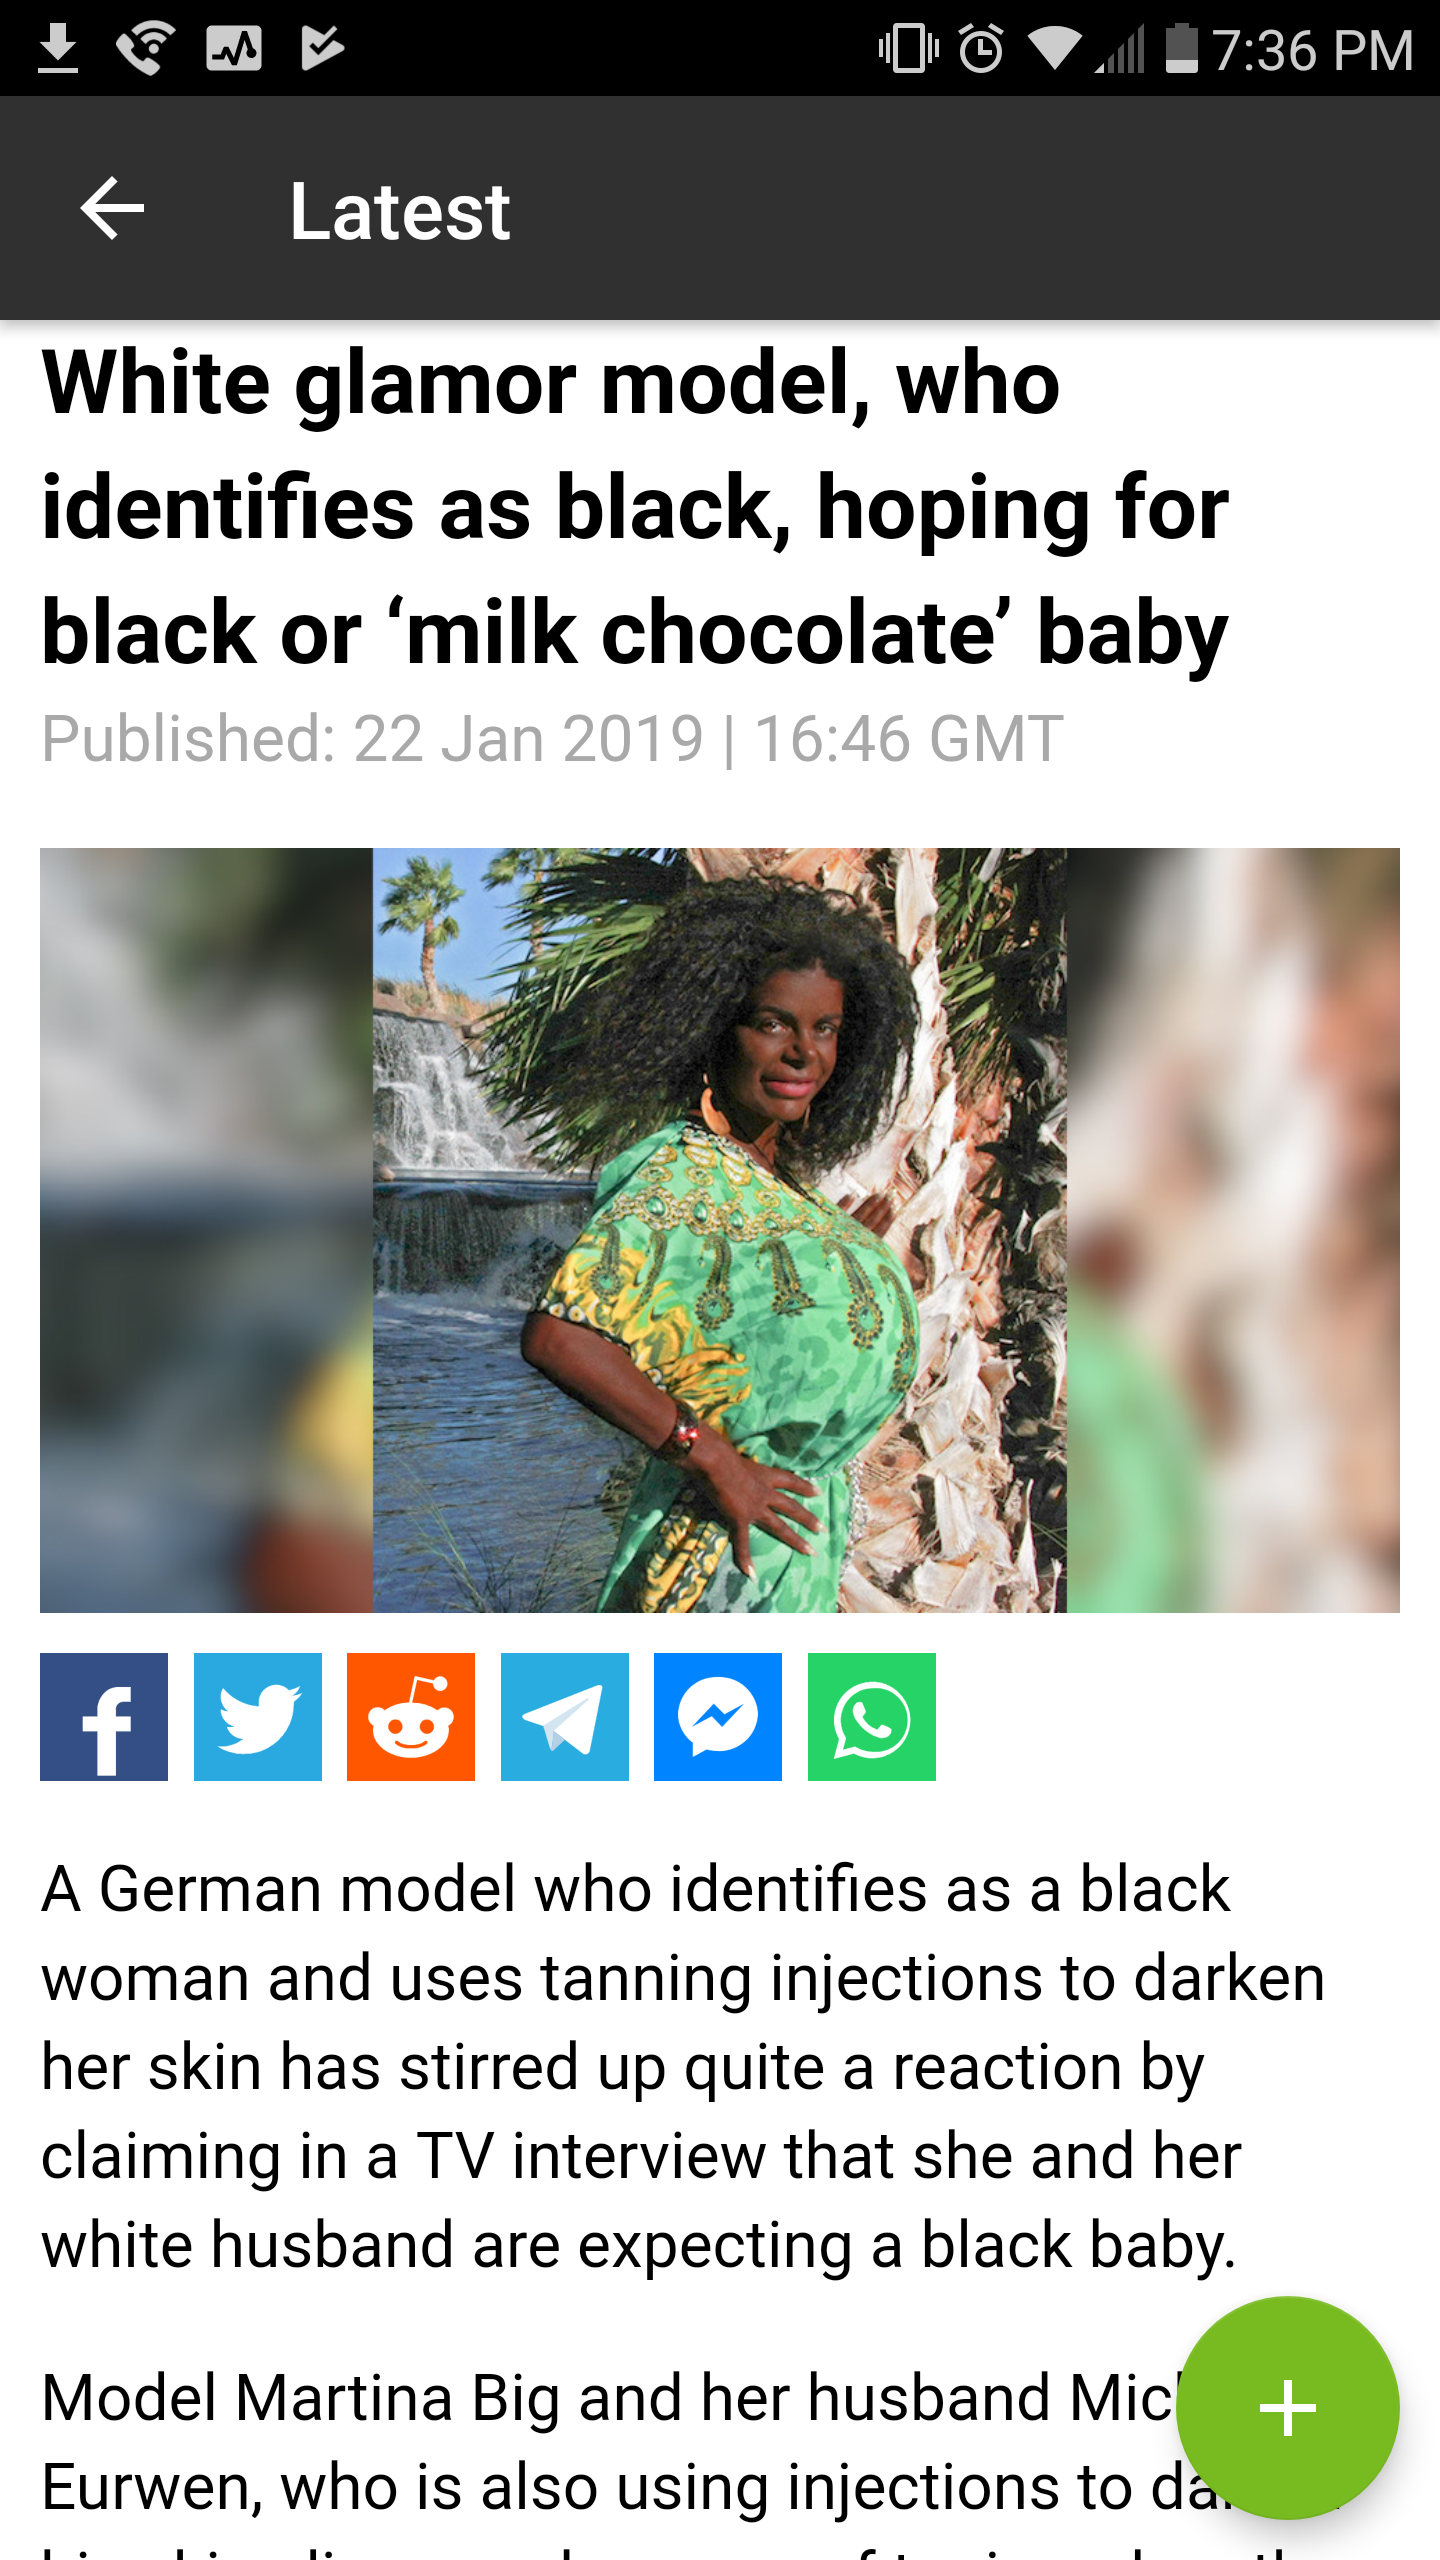 White model who identifies as black hopes for a black baby